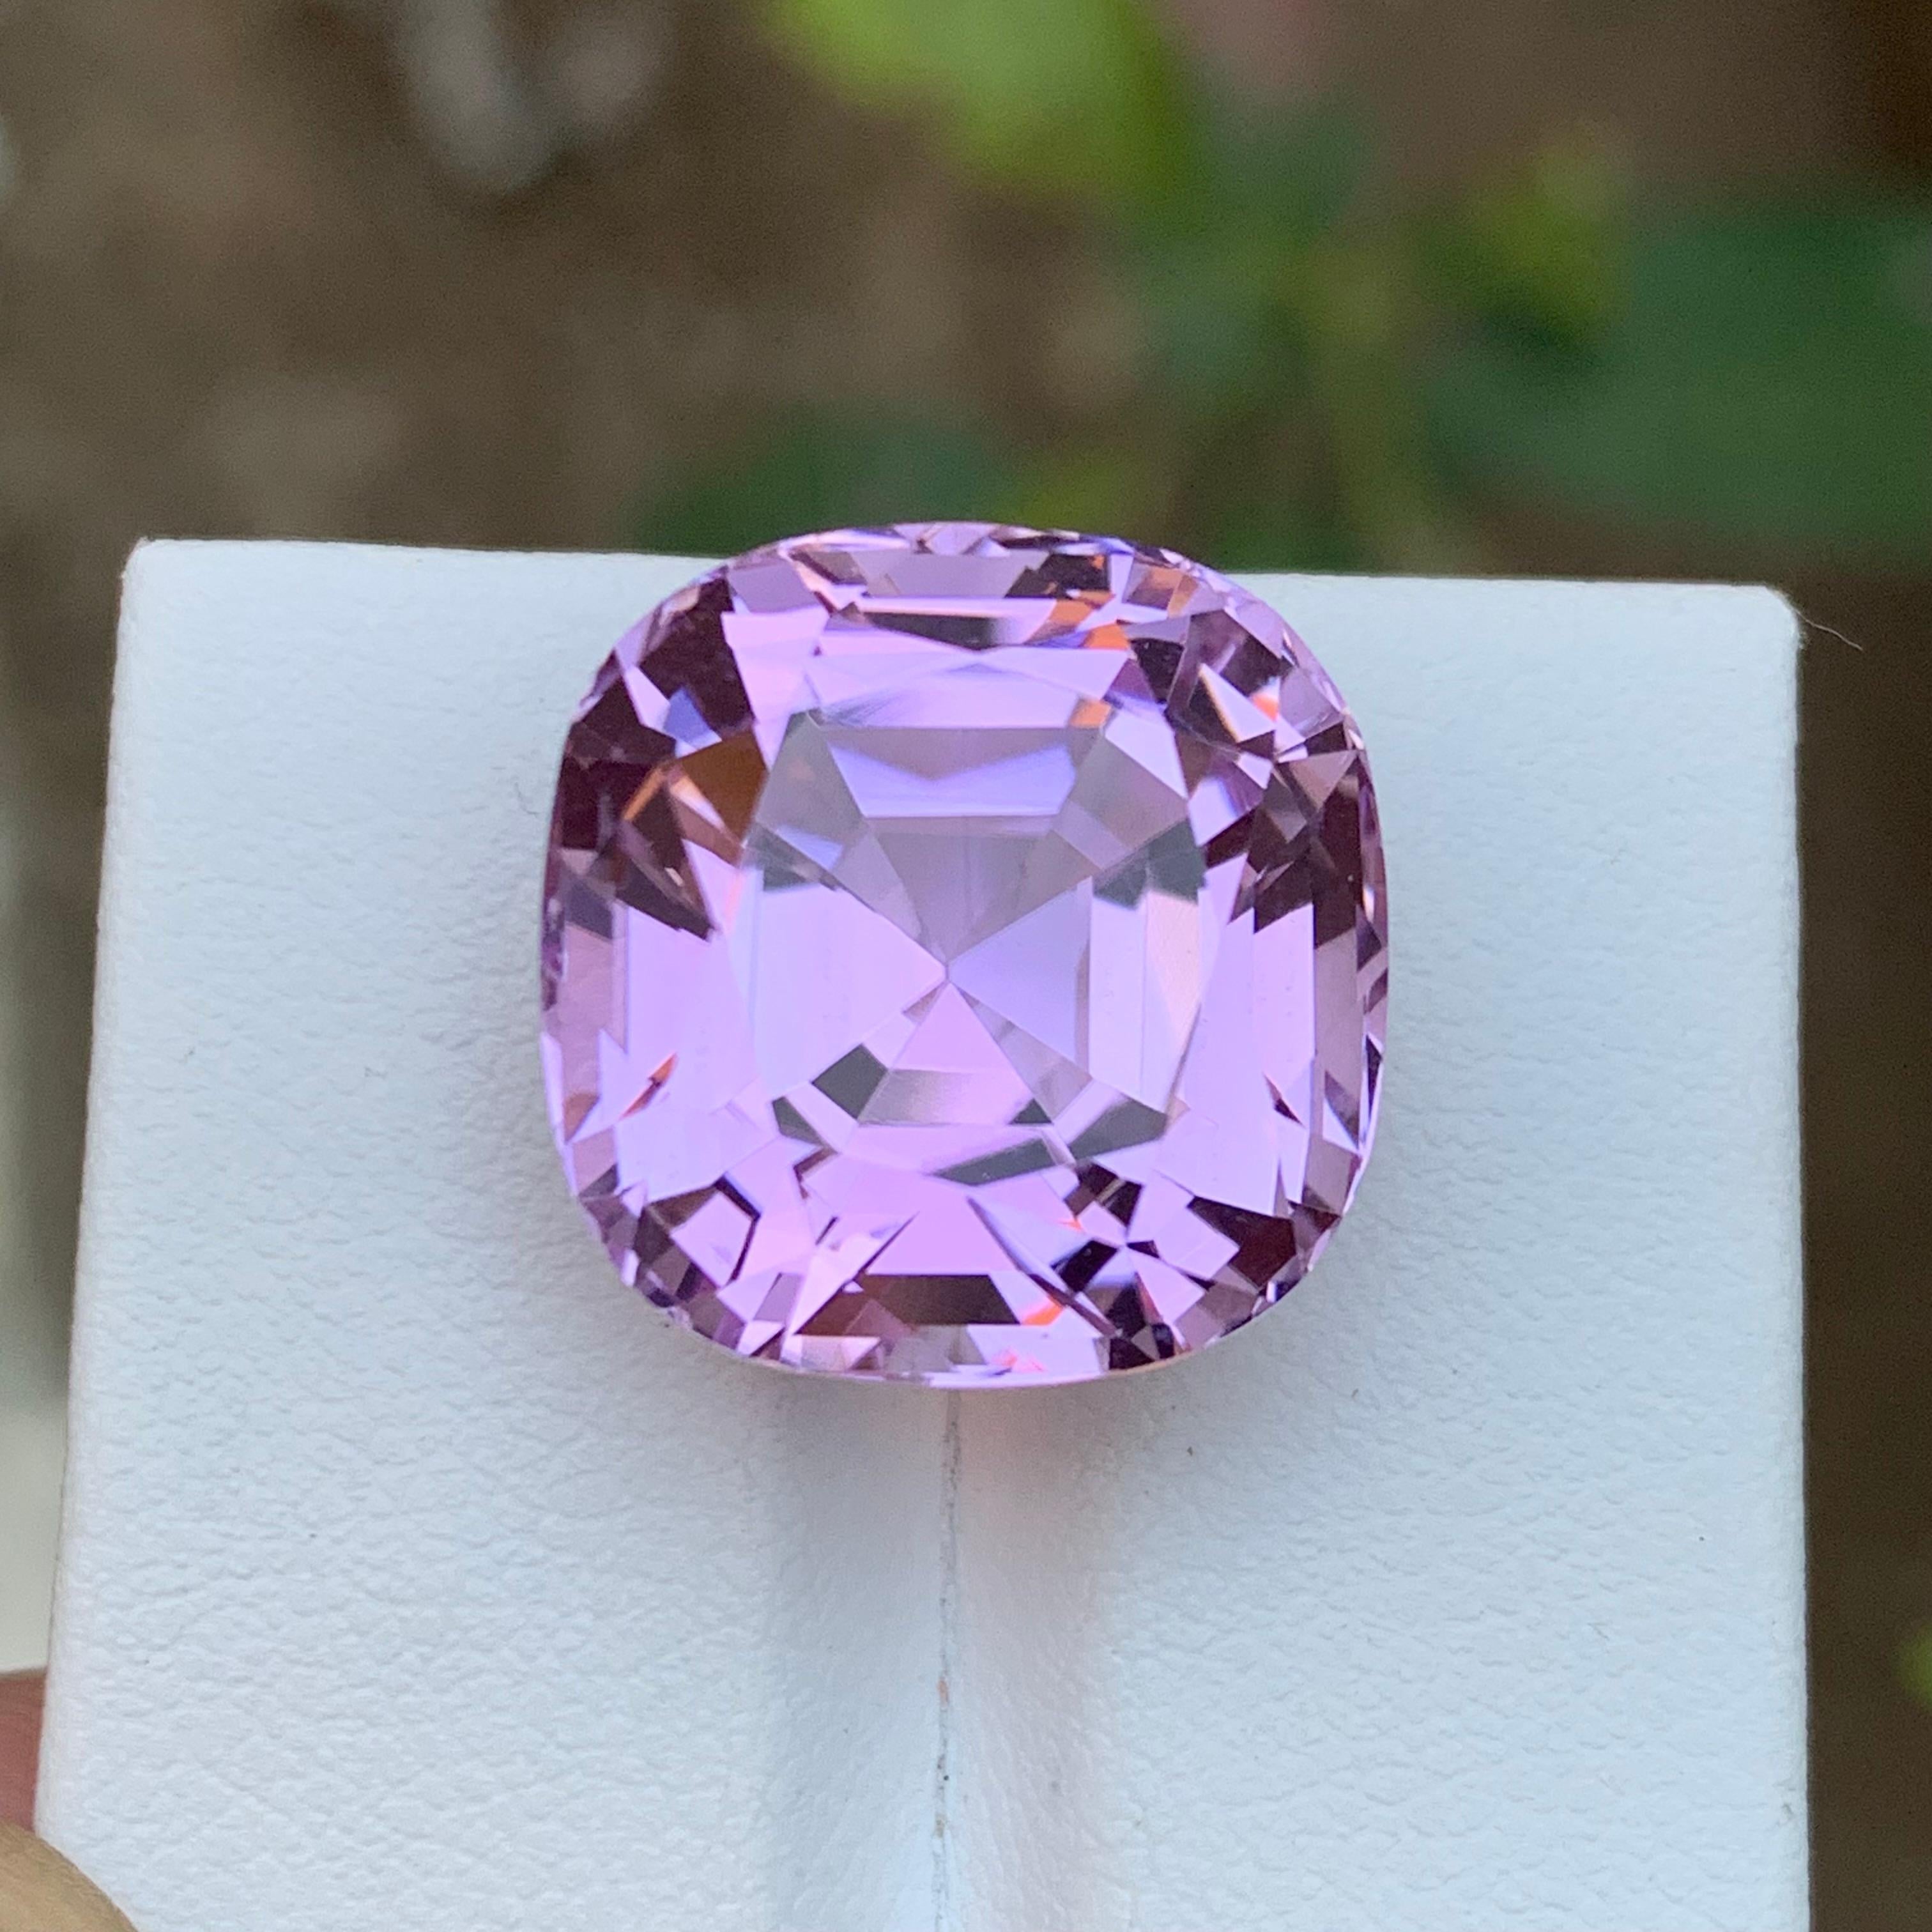 GEMSTONE TYPE: Kunzite
PIECE(S): 1
WEIGHT: 25.80 Carats
SHAPE: Square Cushion
SIZE (MM): 16.94 x 16.57 x 12.90
COLOR: Purple Pink
CLARITY: Approx Eye Clean
TREATMENT: Heated
ORIGIN: Afghanistan
CERTIFICATE: On demand

A very breathtaking rare purple